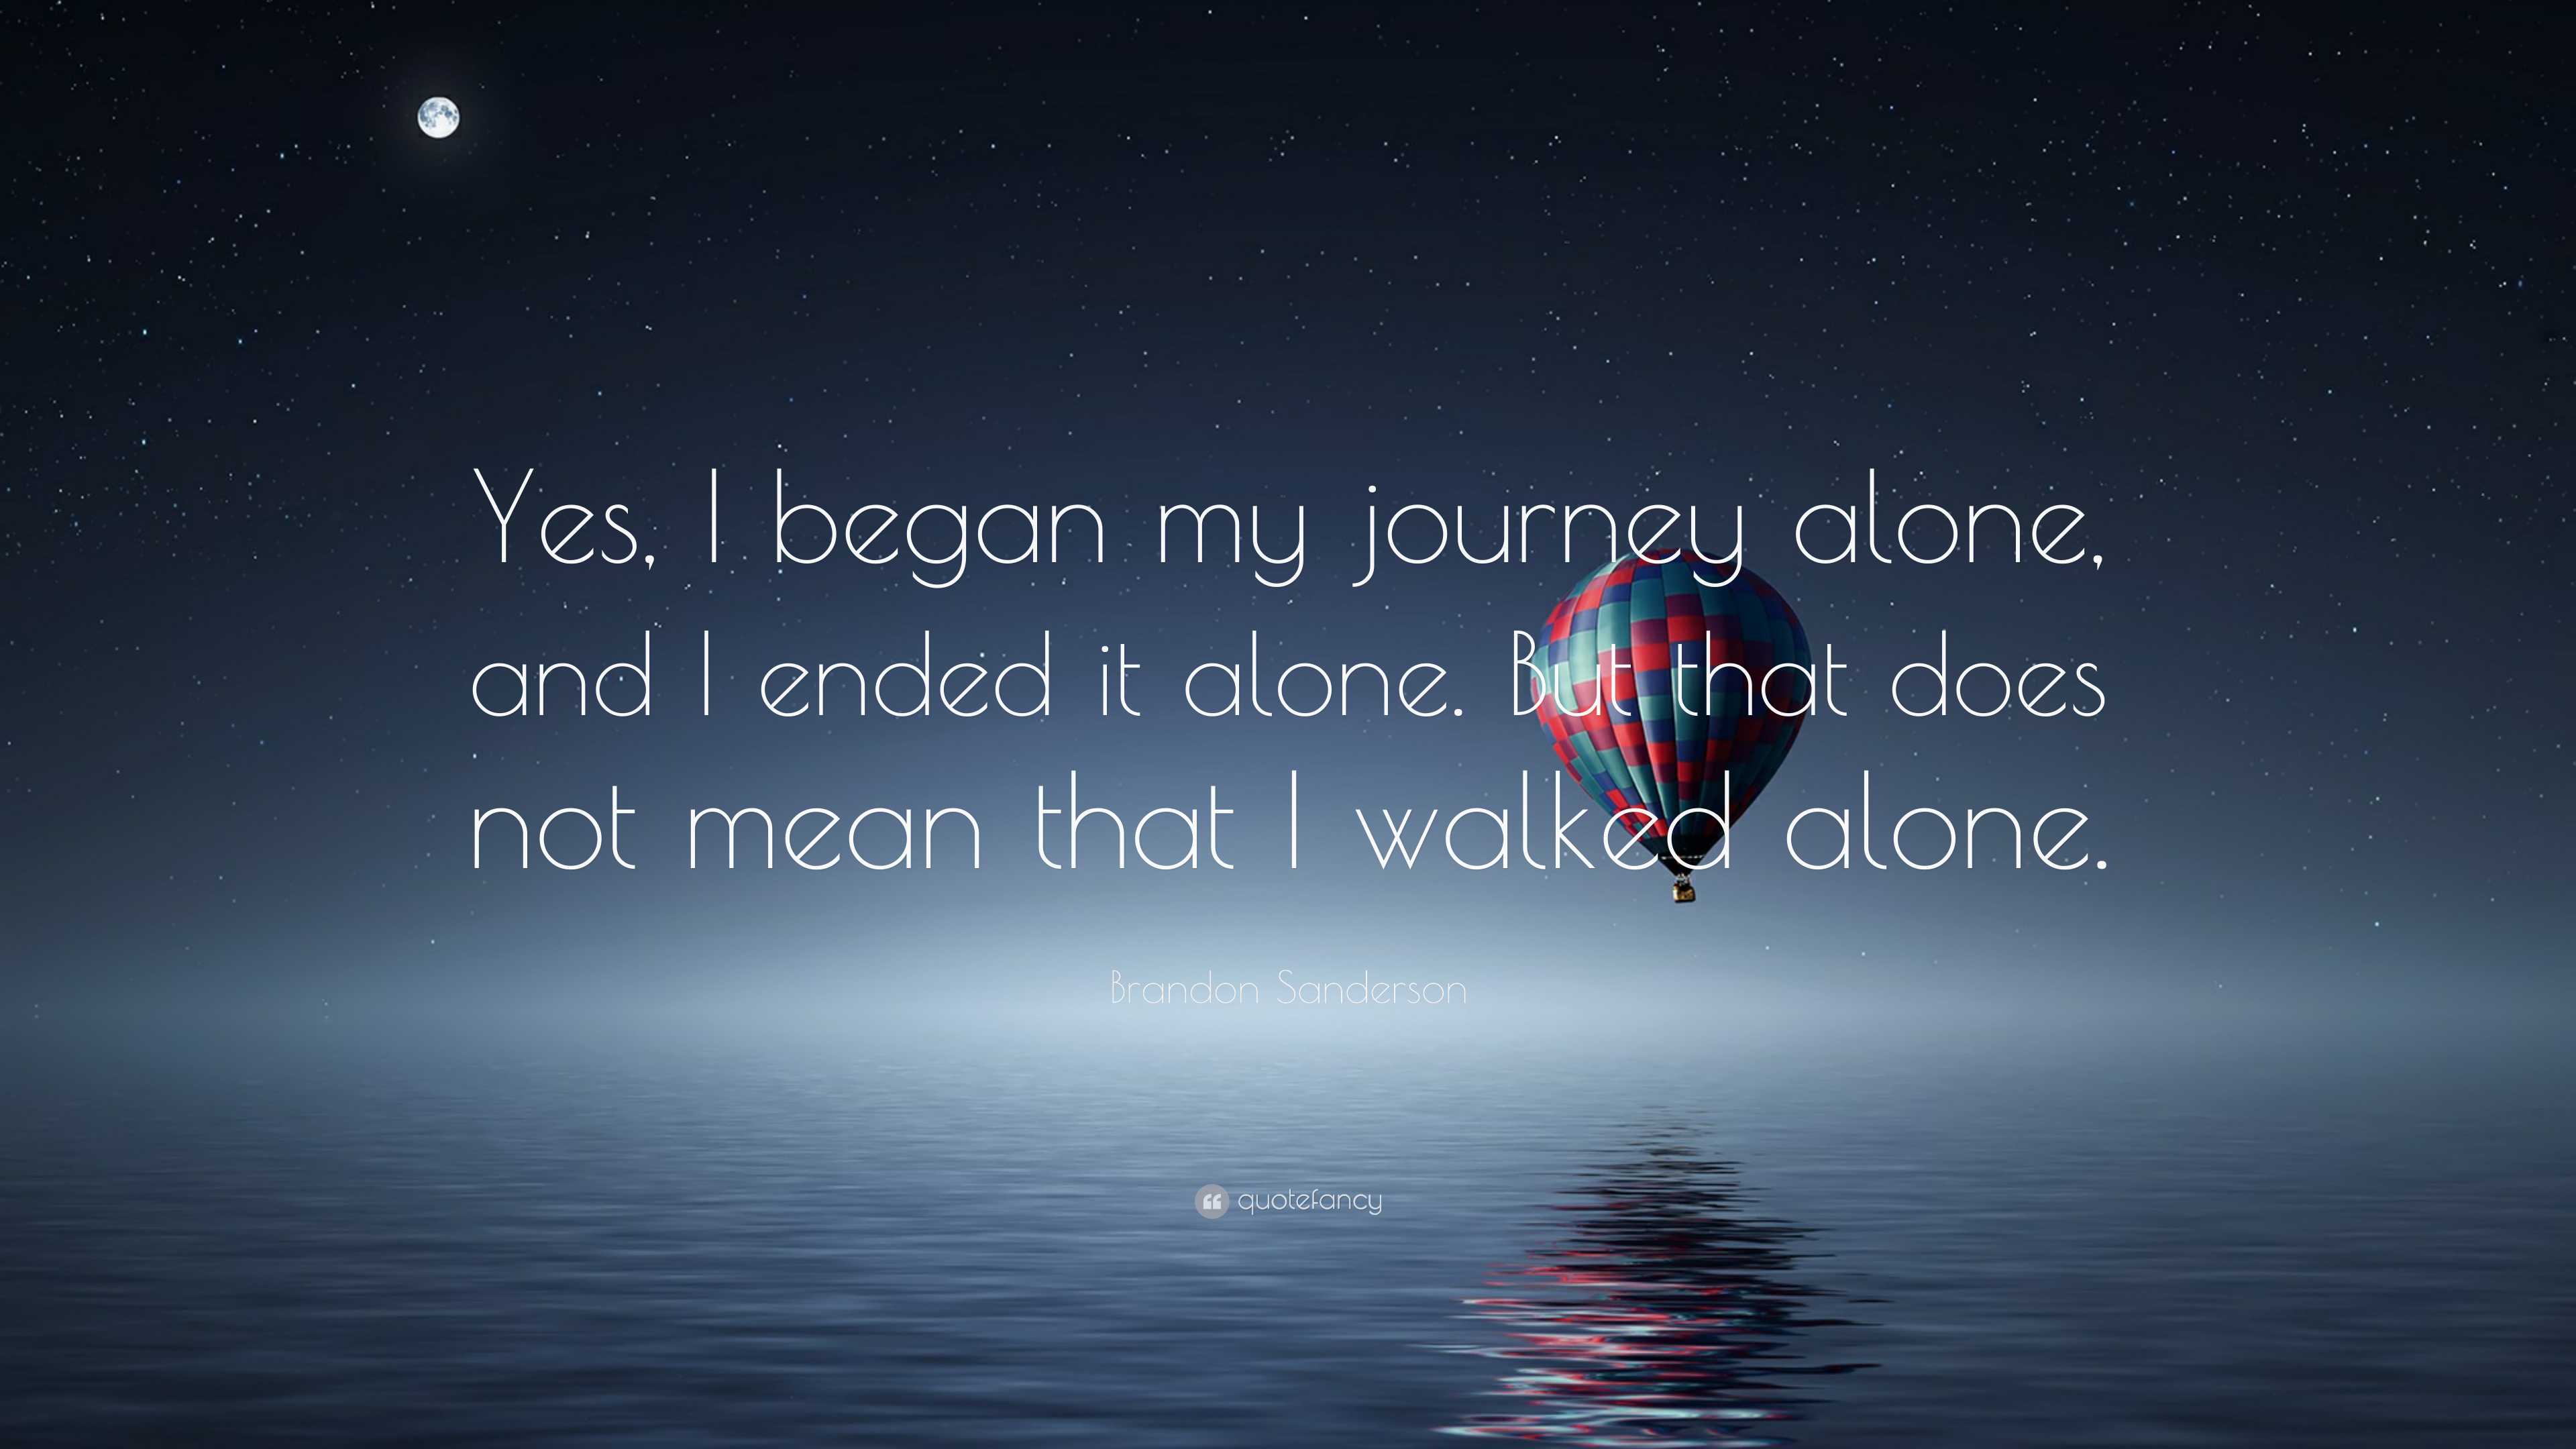 Brandon Sanderson Quote: “Yes, I began my journey alone, and I